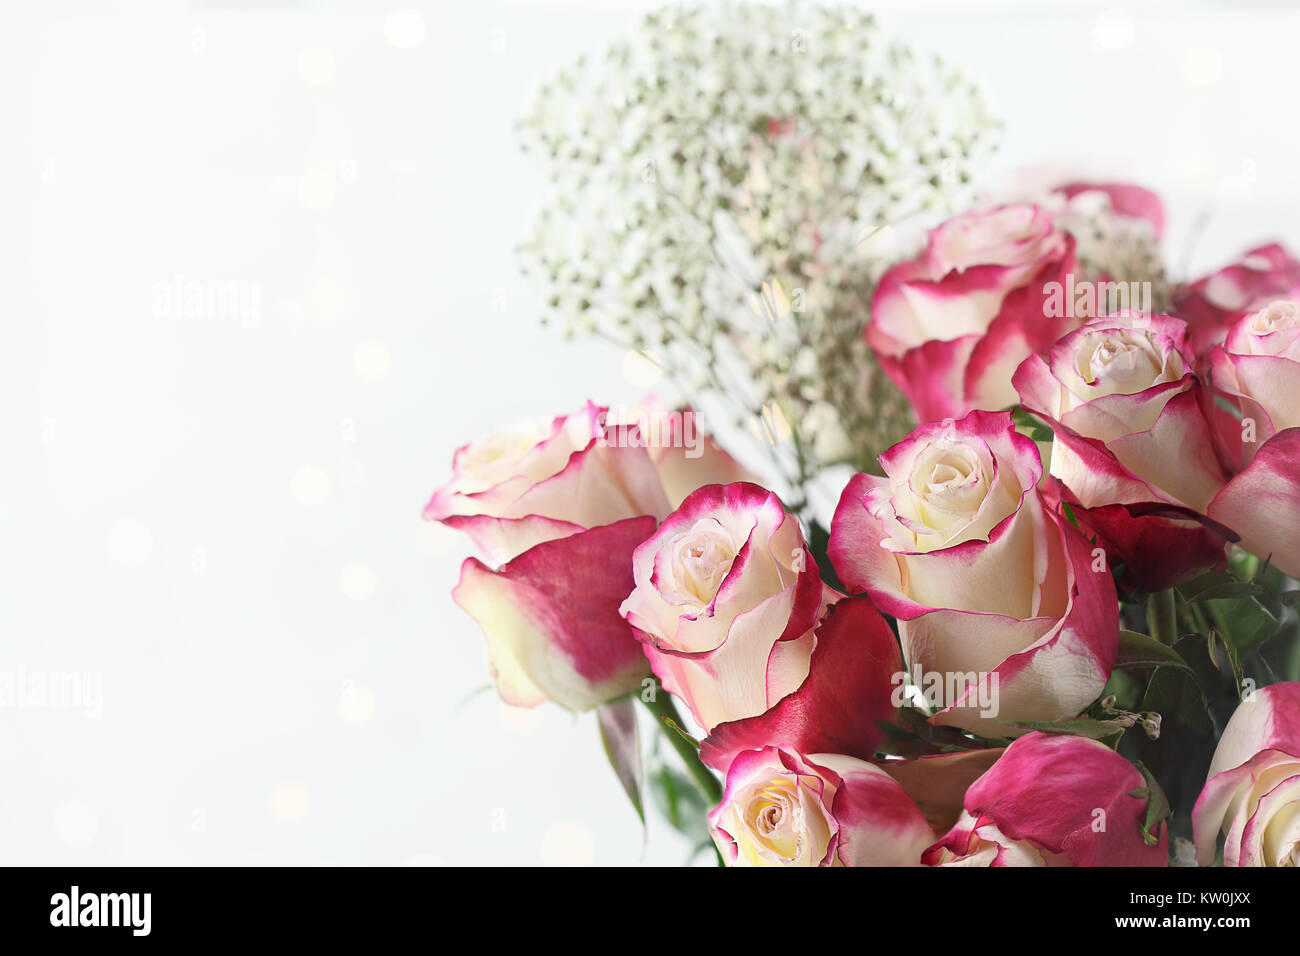 Beautiful bouquet of  red and white roses with baby's breath. Selective focus with shallow depth of field. Stock Photo